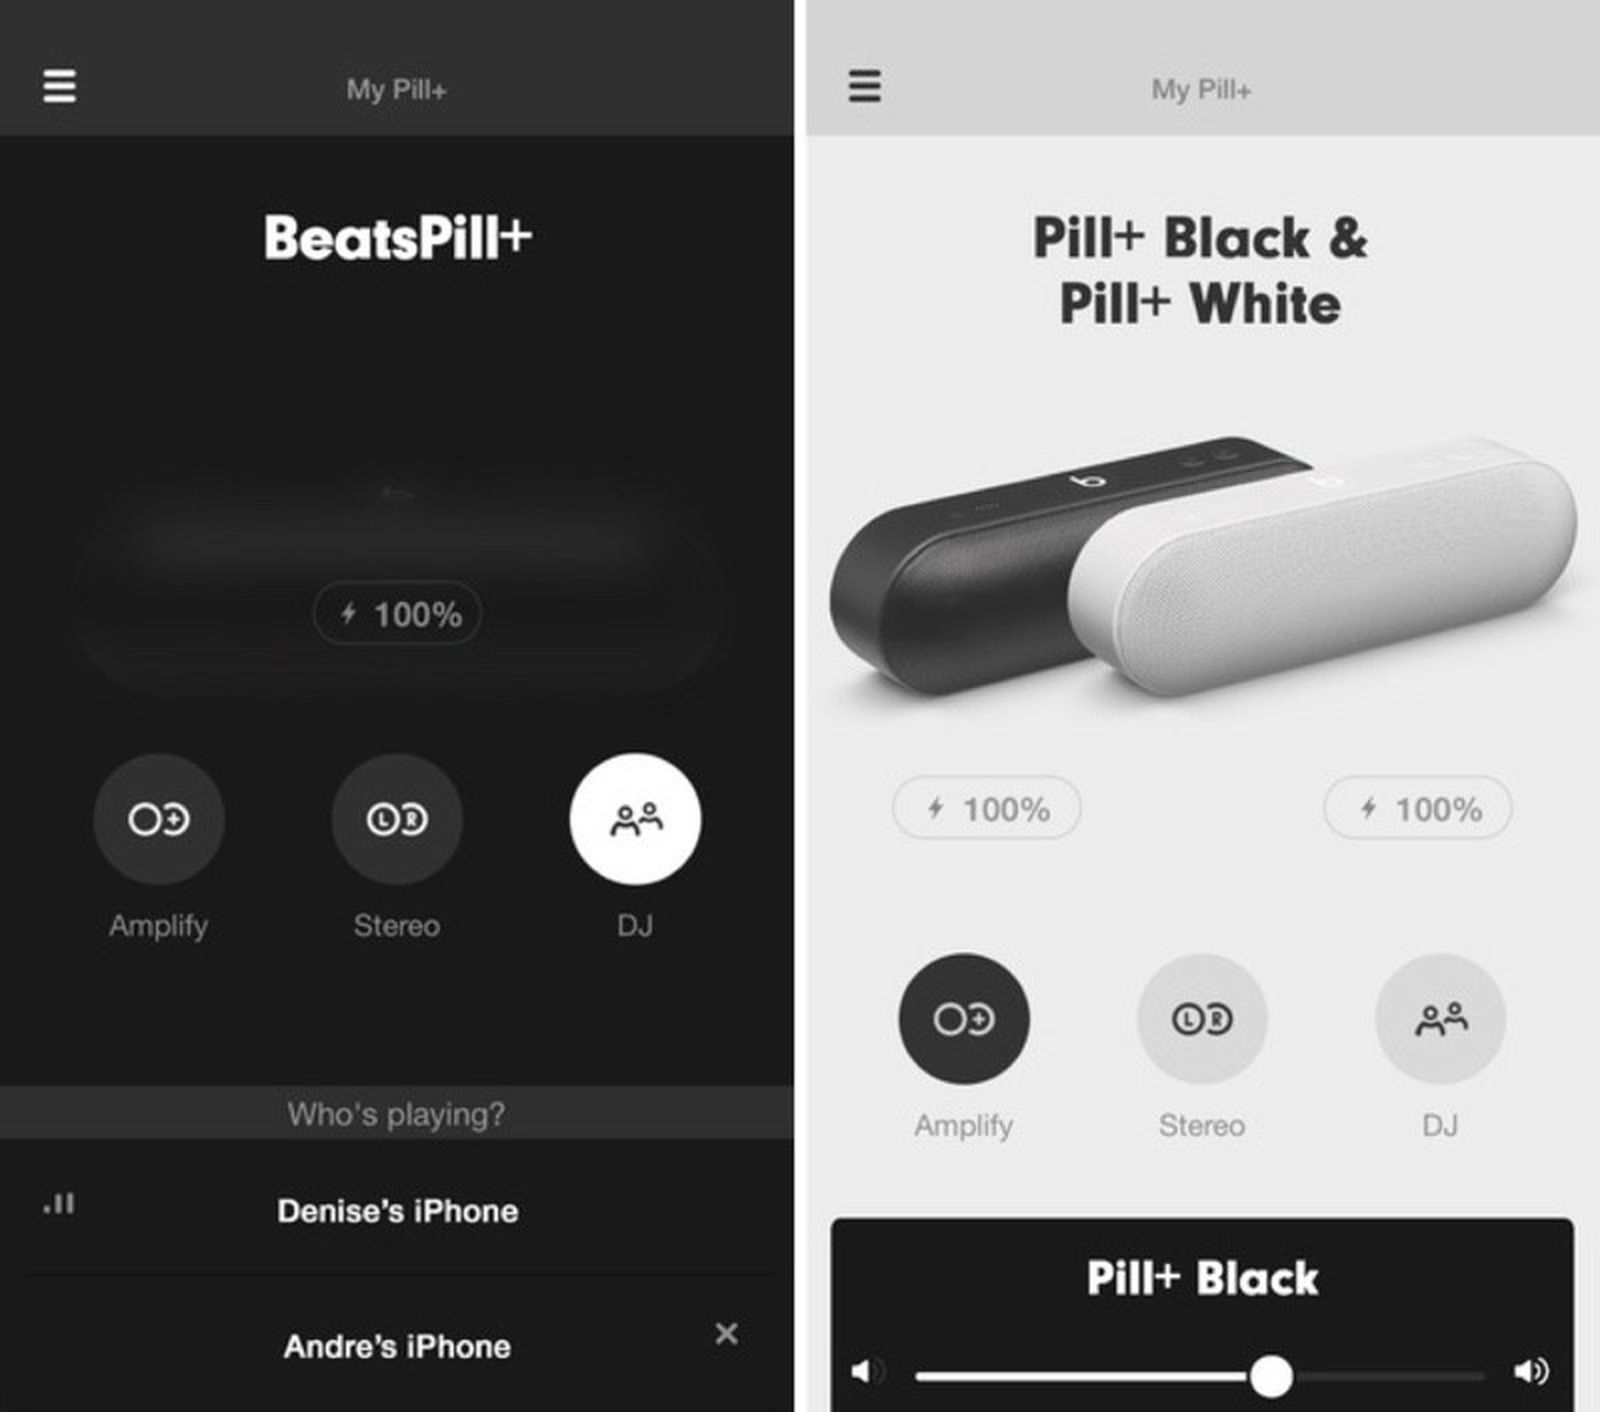 Apple Releases 'Beats Pill+' App for Controlling Beats Pill+ Speaker on iOS Android - MacRumors